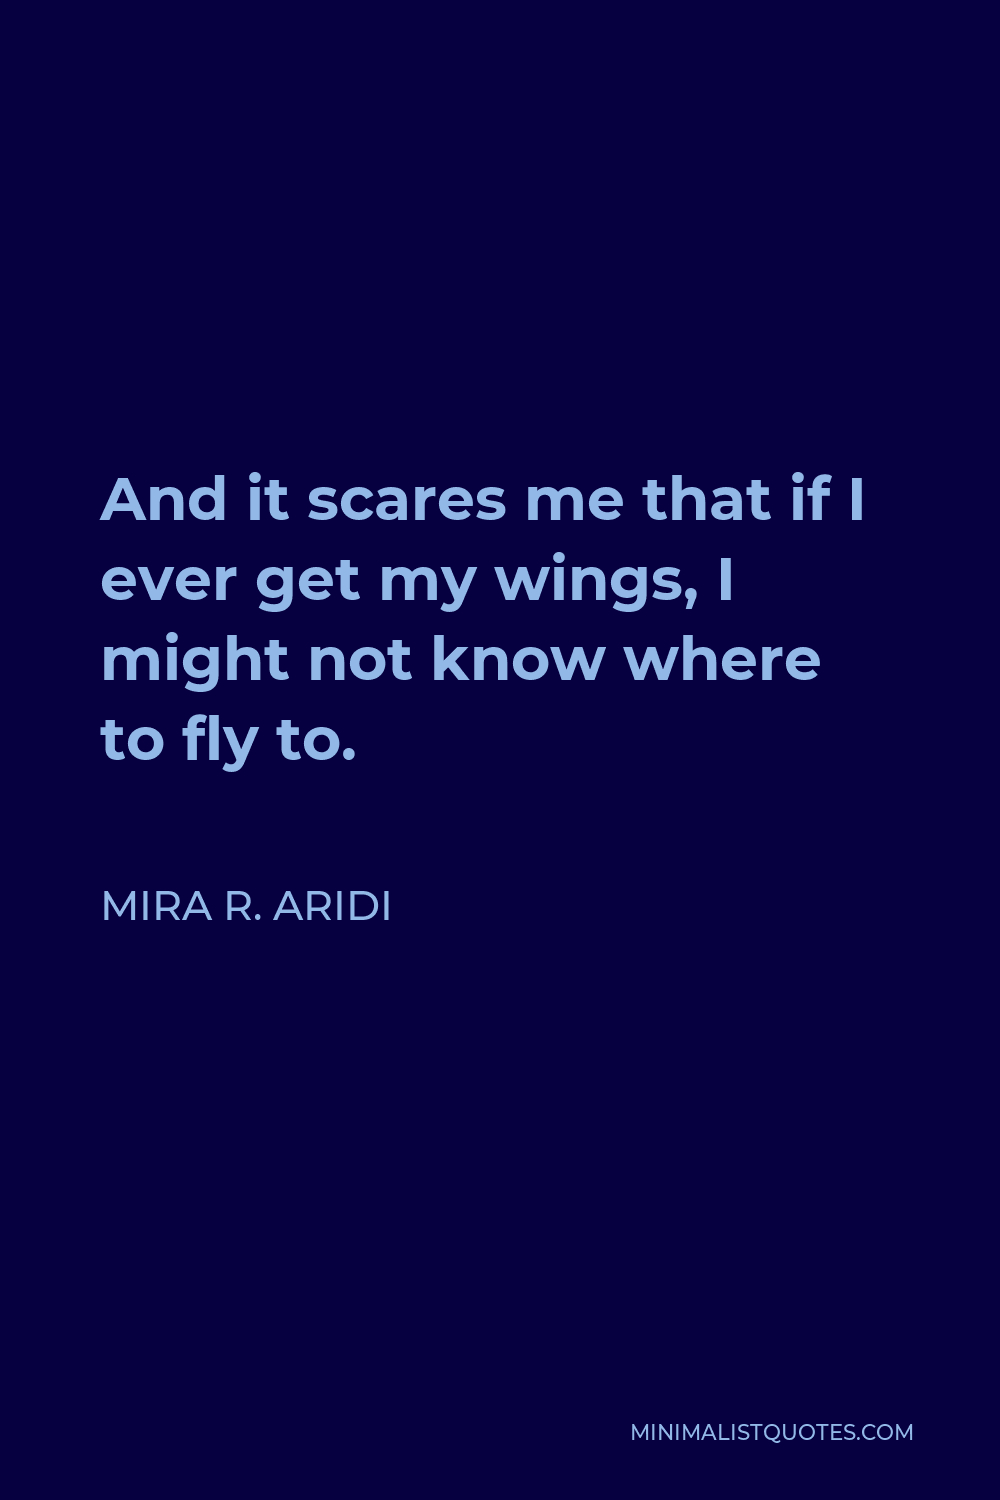 Mira R. Aridi Quote - And it scares me that if I ever get my wings, I might not know where to fly to.